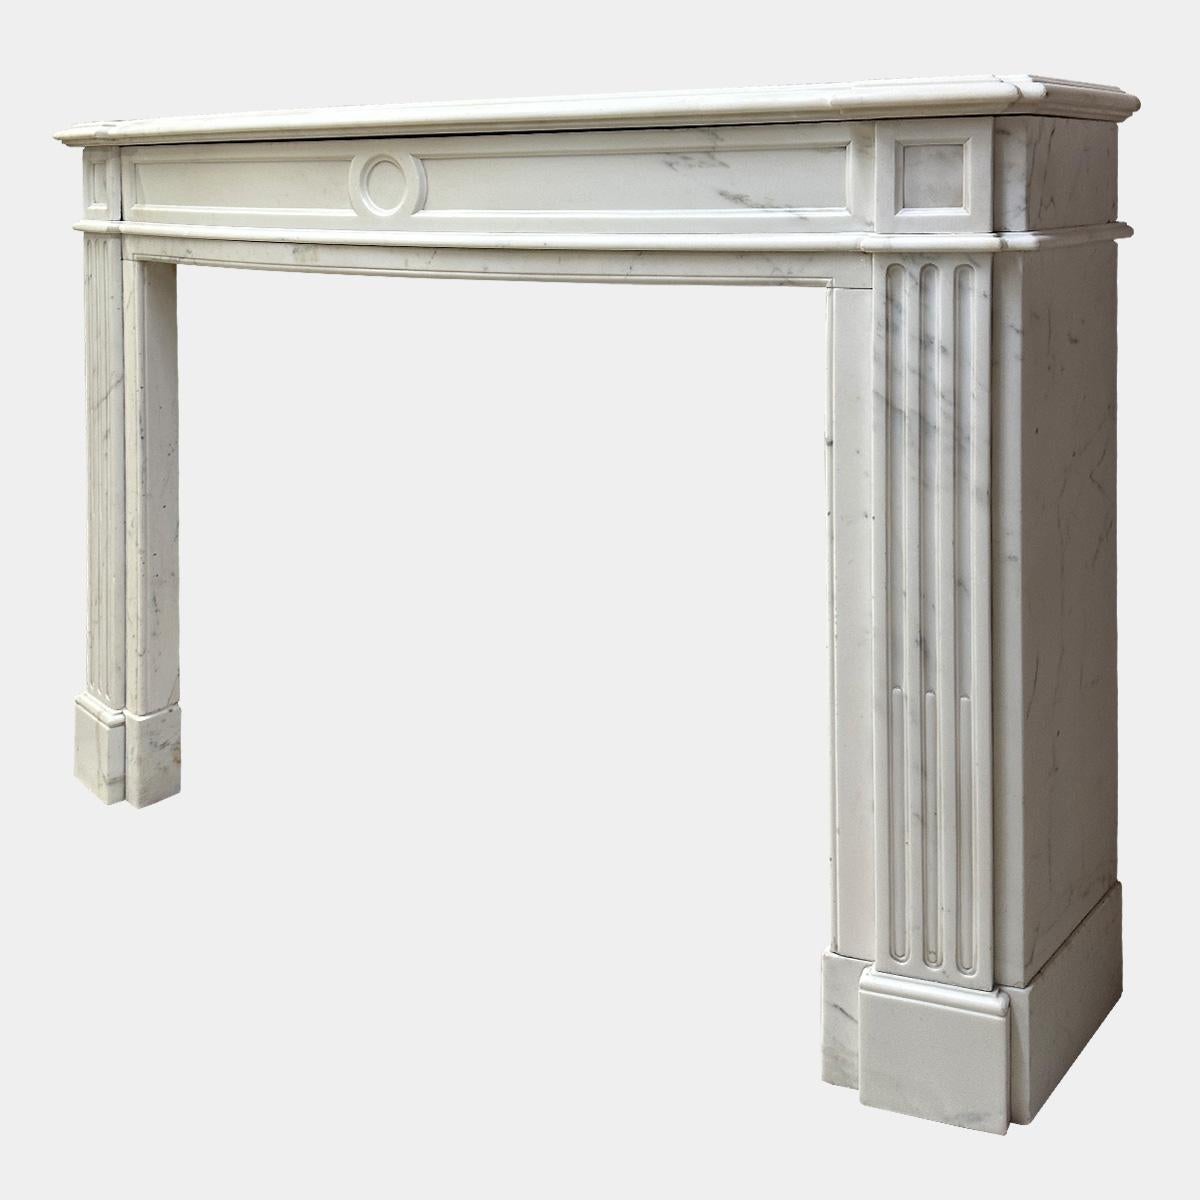 An Antique French Statuary White Marble Louis XVI Style Fireplace mantel For Sale 1